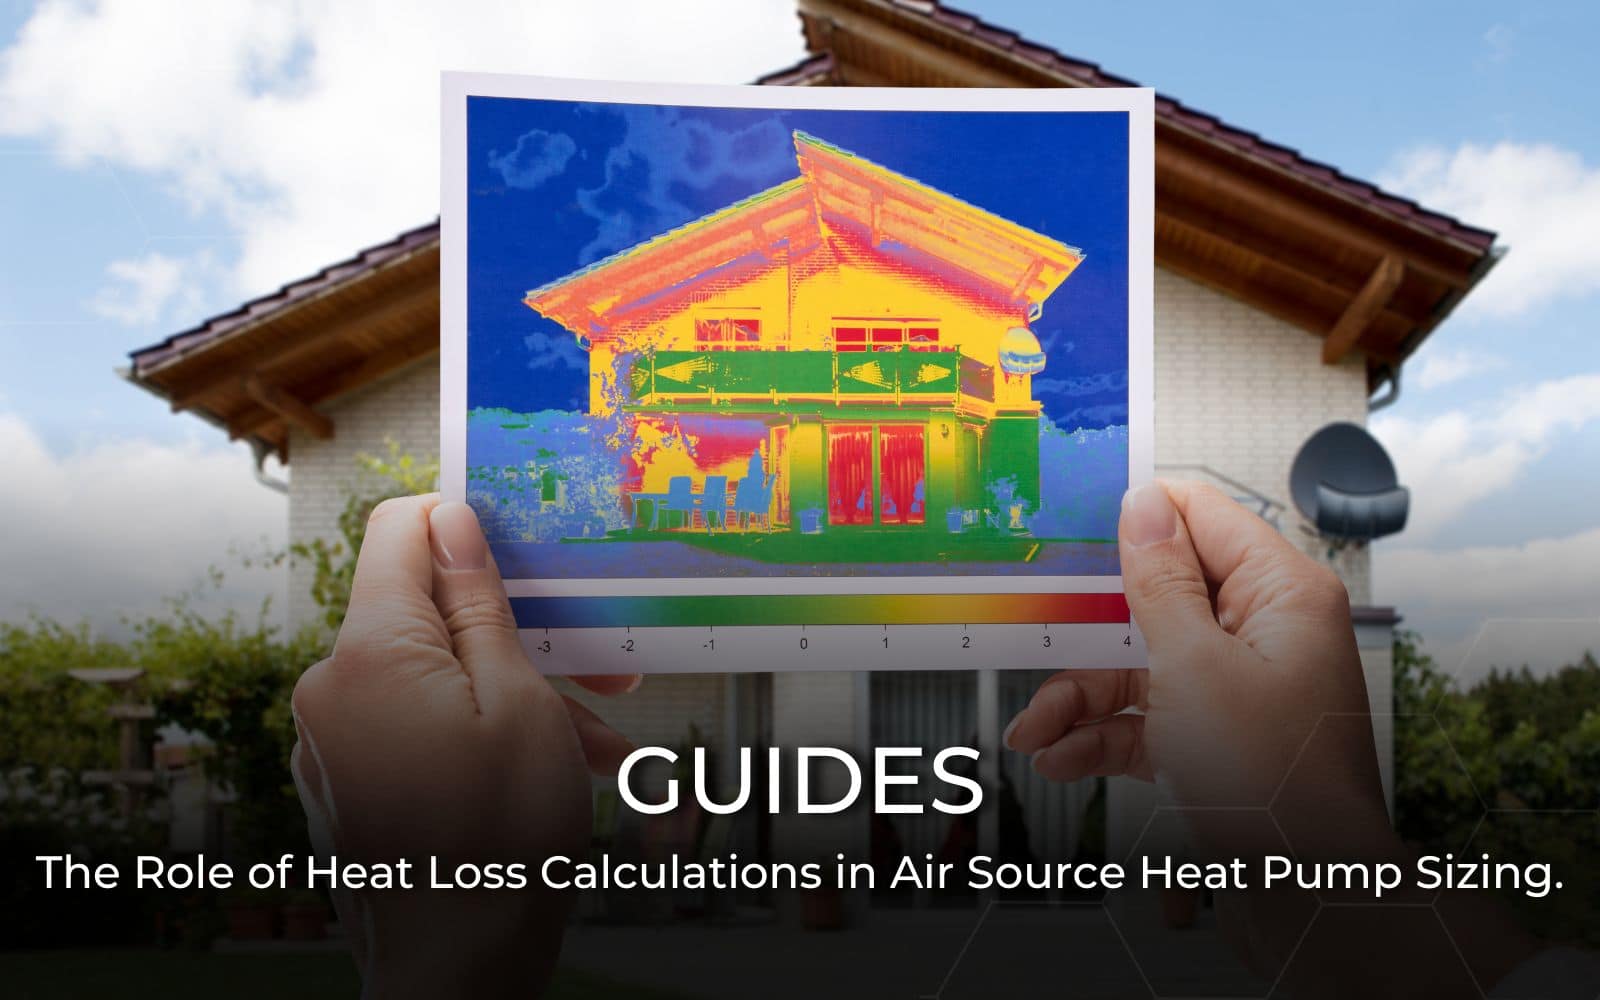 The role of heat loss calculations